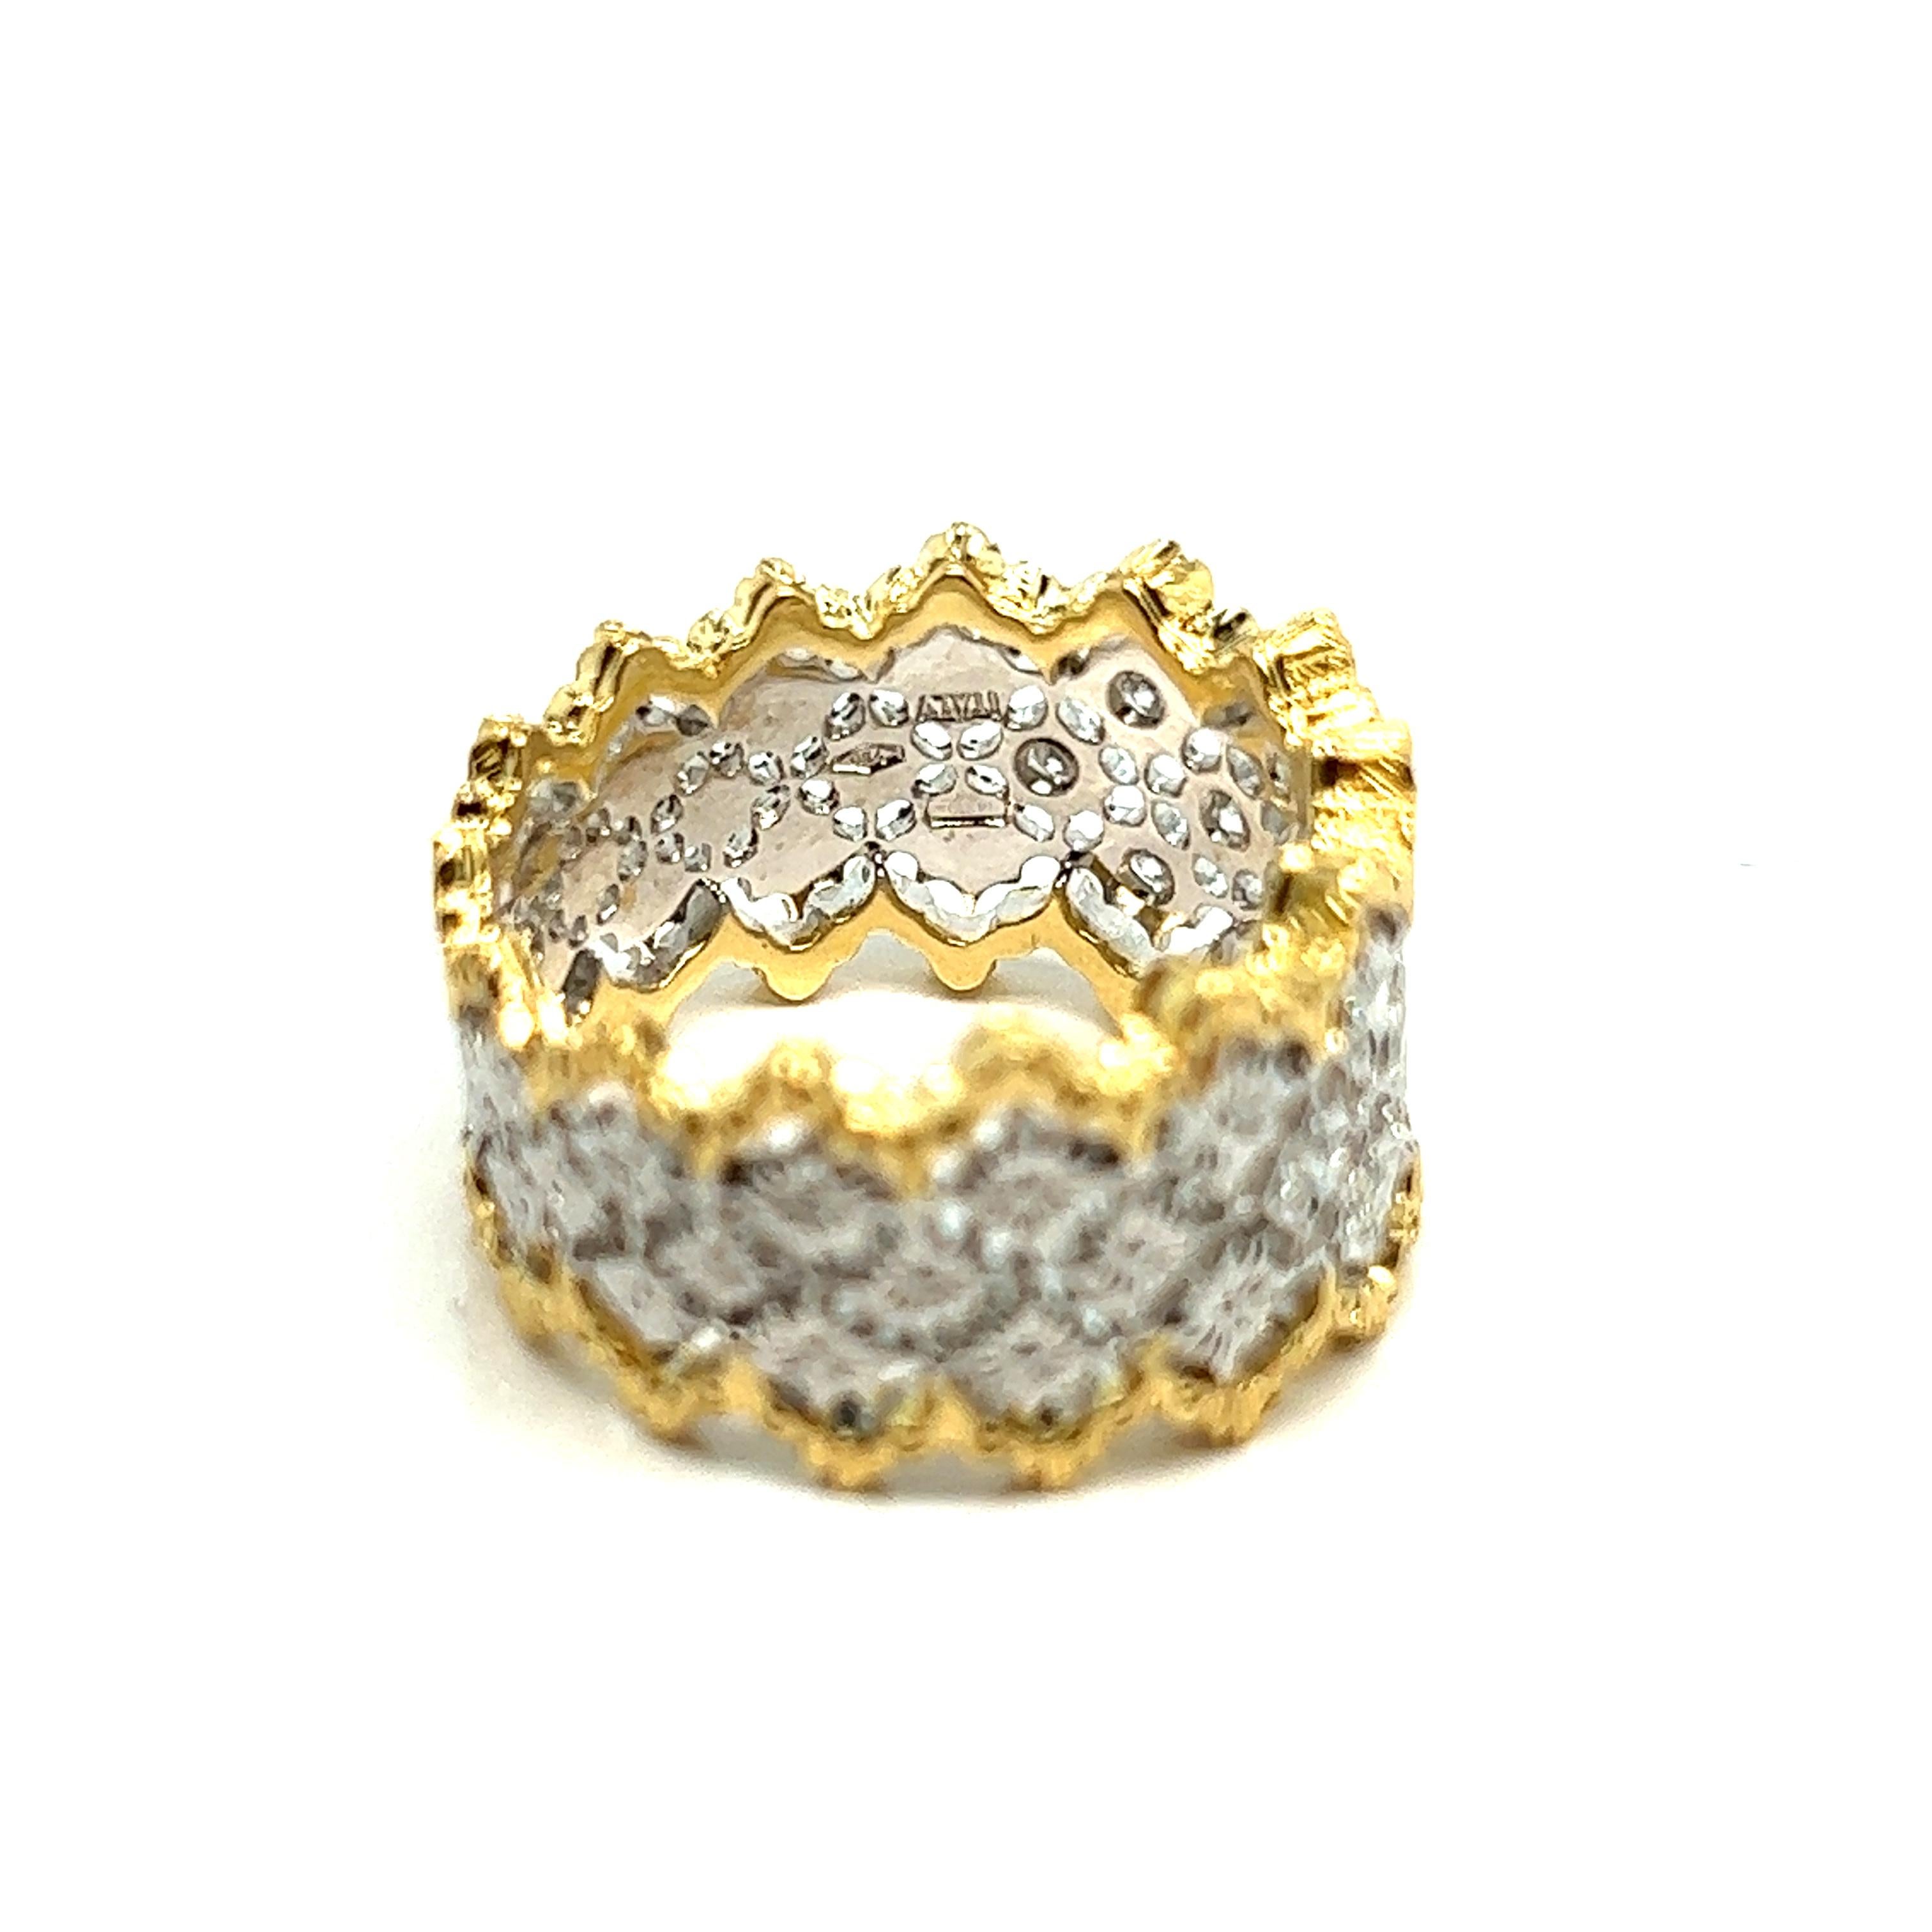 Baroque Lace Ring with 13 Brilliant Cut Diamonds in 18K White and Yellow Gold 3